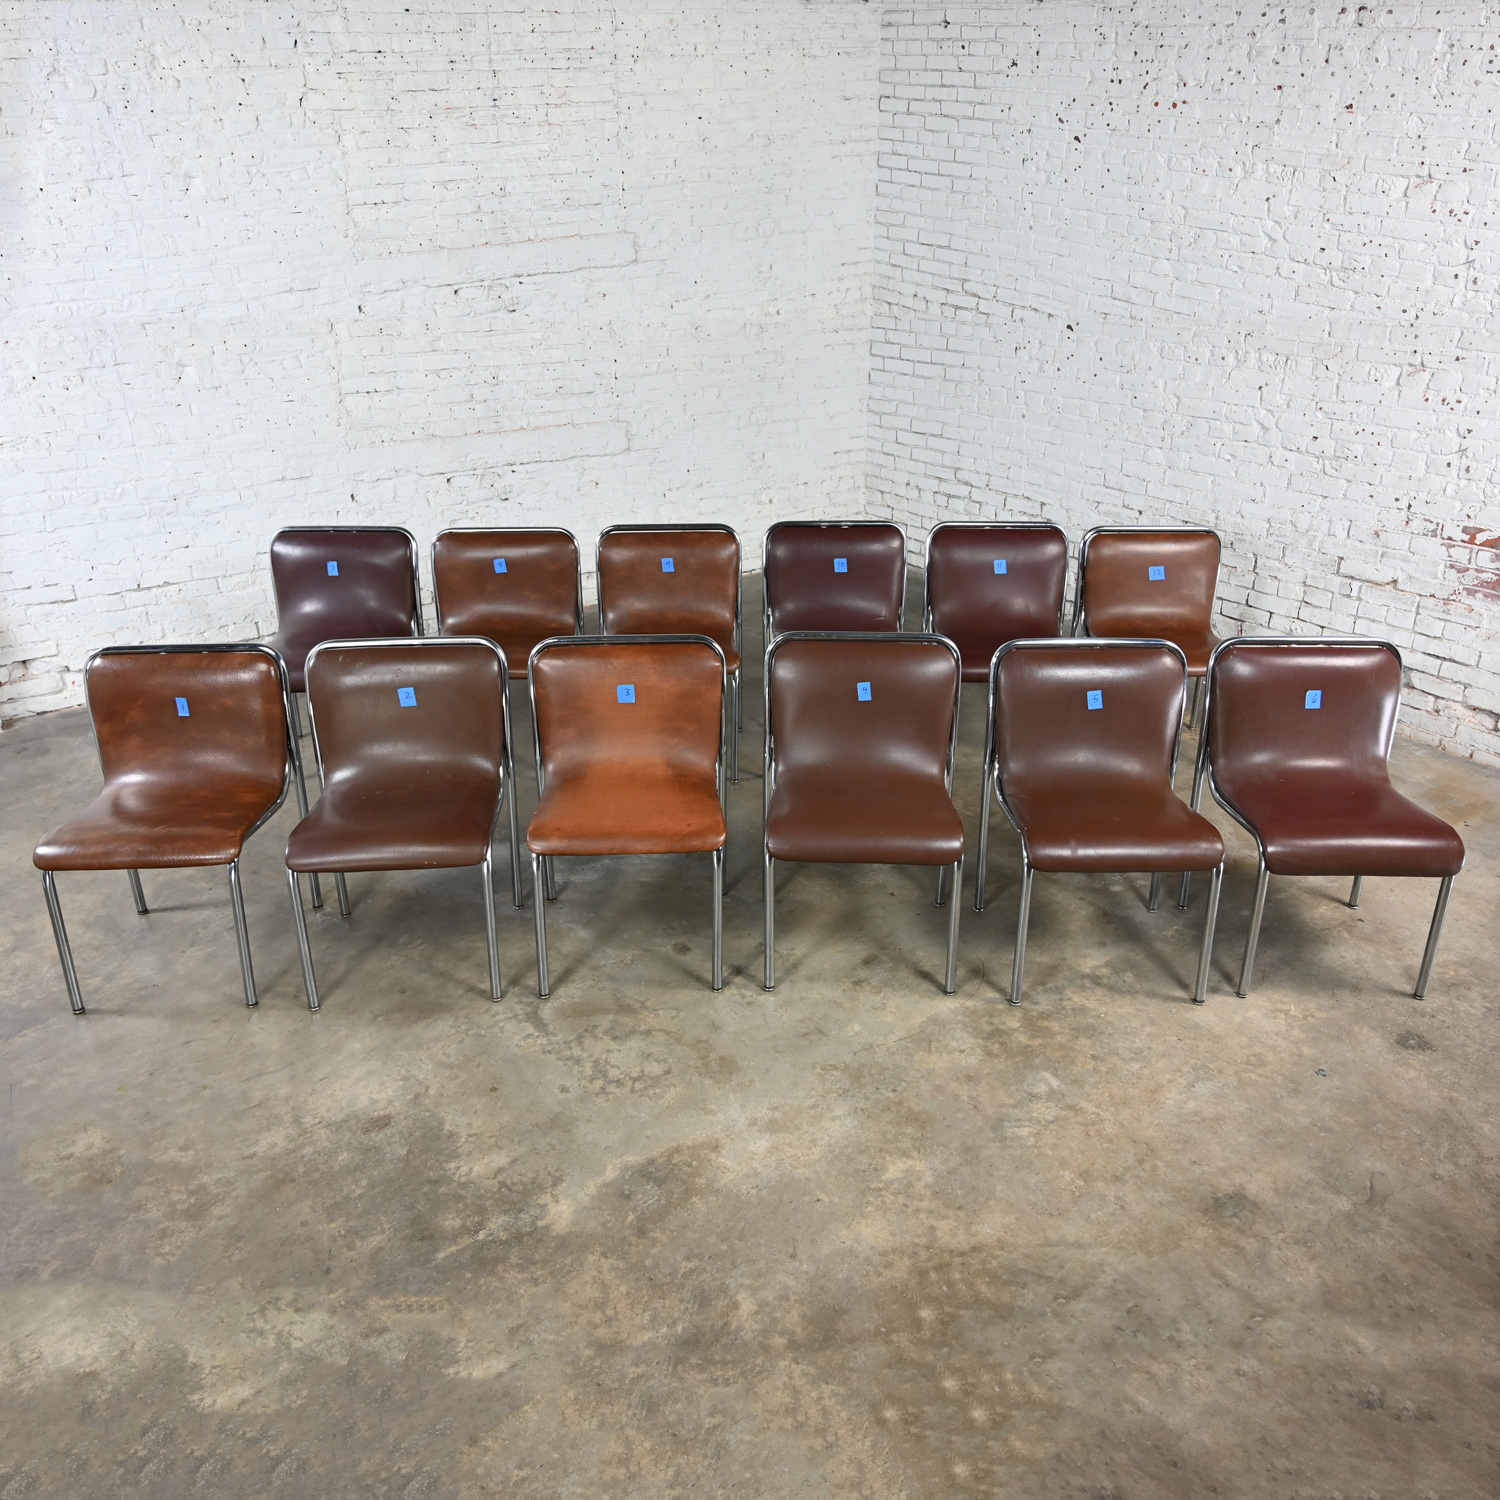 Mid to Late 20th Century Bauhaus to MCM Brown Vinyl & Chrome Scoop Chairs by Jansko Set of 12